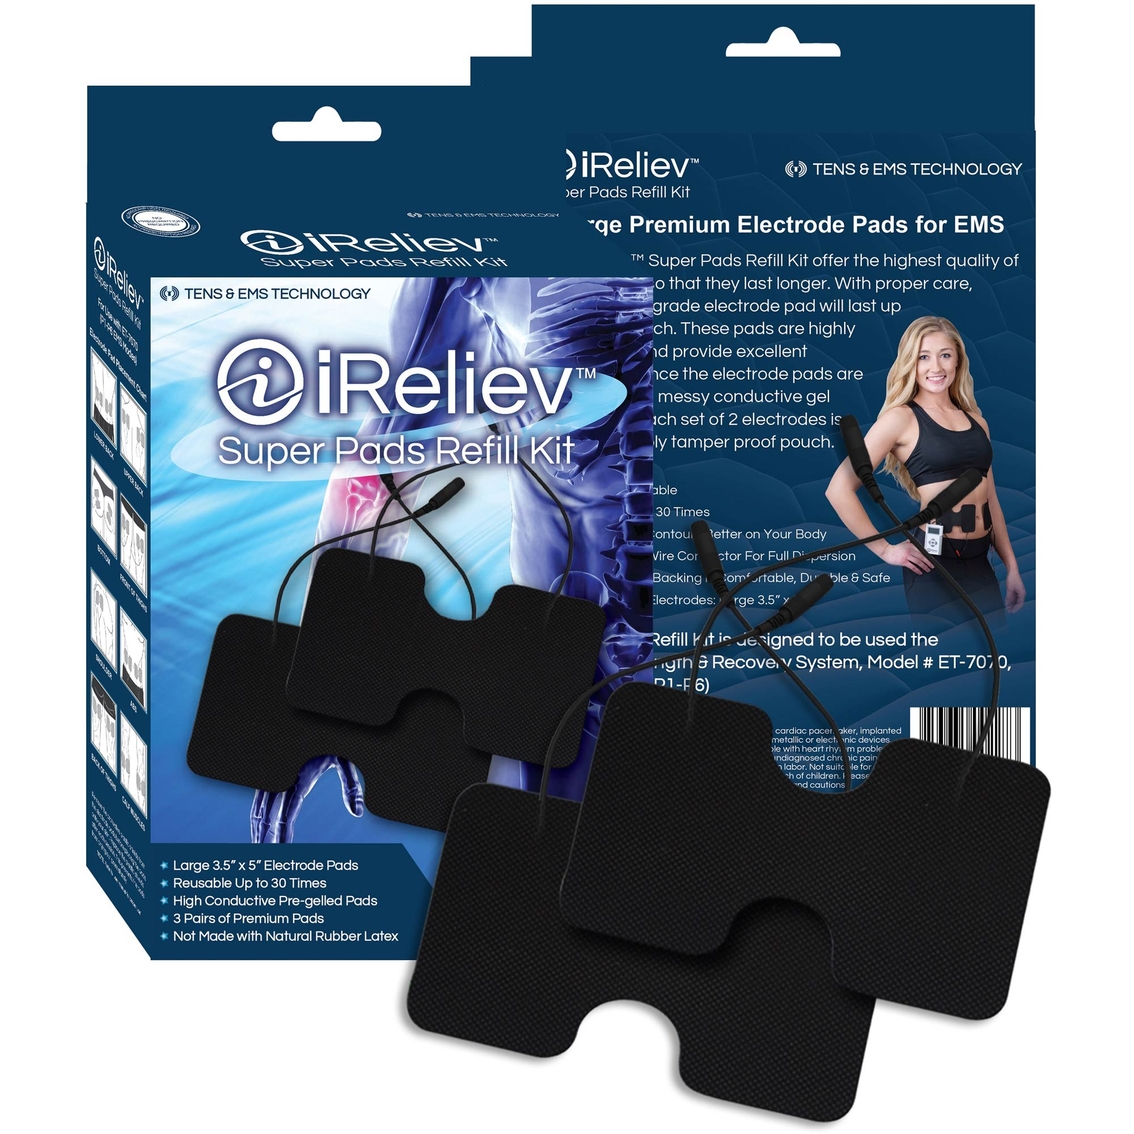 iReliev Super Pads Refill Kit - Image 2 of 4